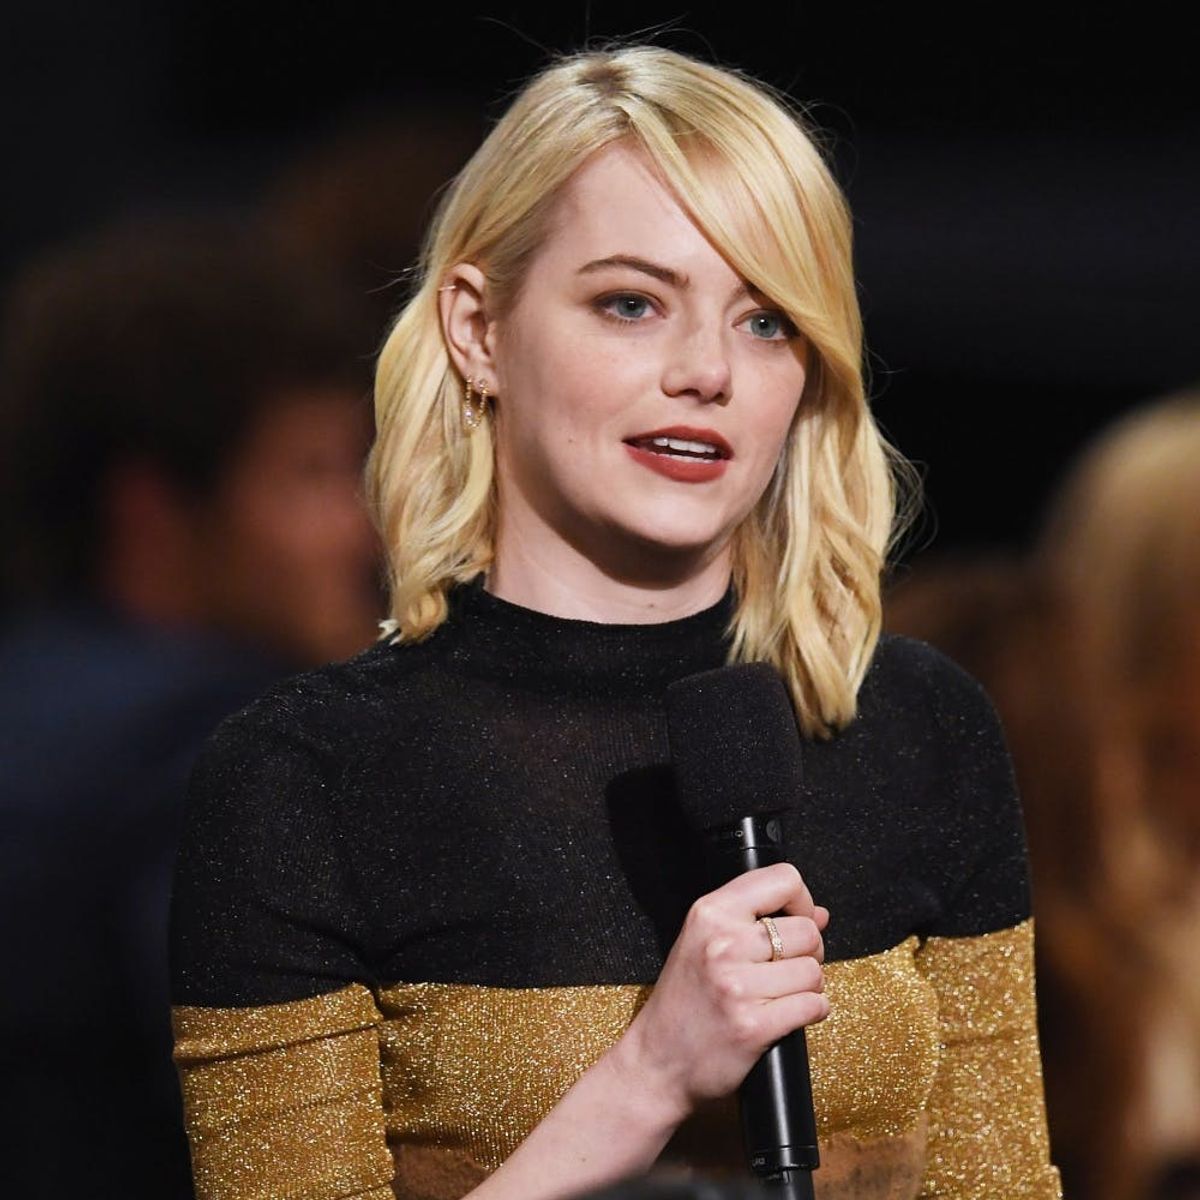 Emma Stone Reveals Her Male Costars Have Taken Pay Cuts to Ensure Equal Pay